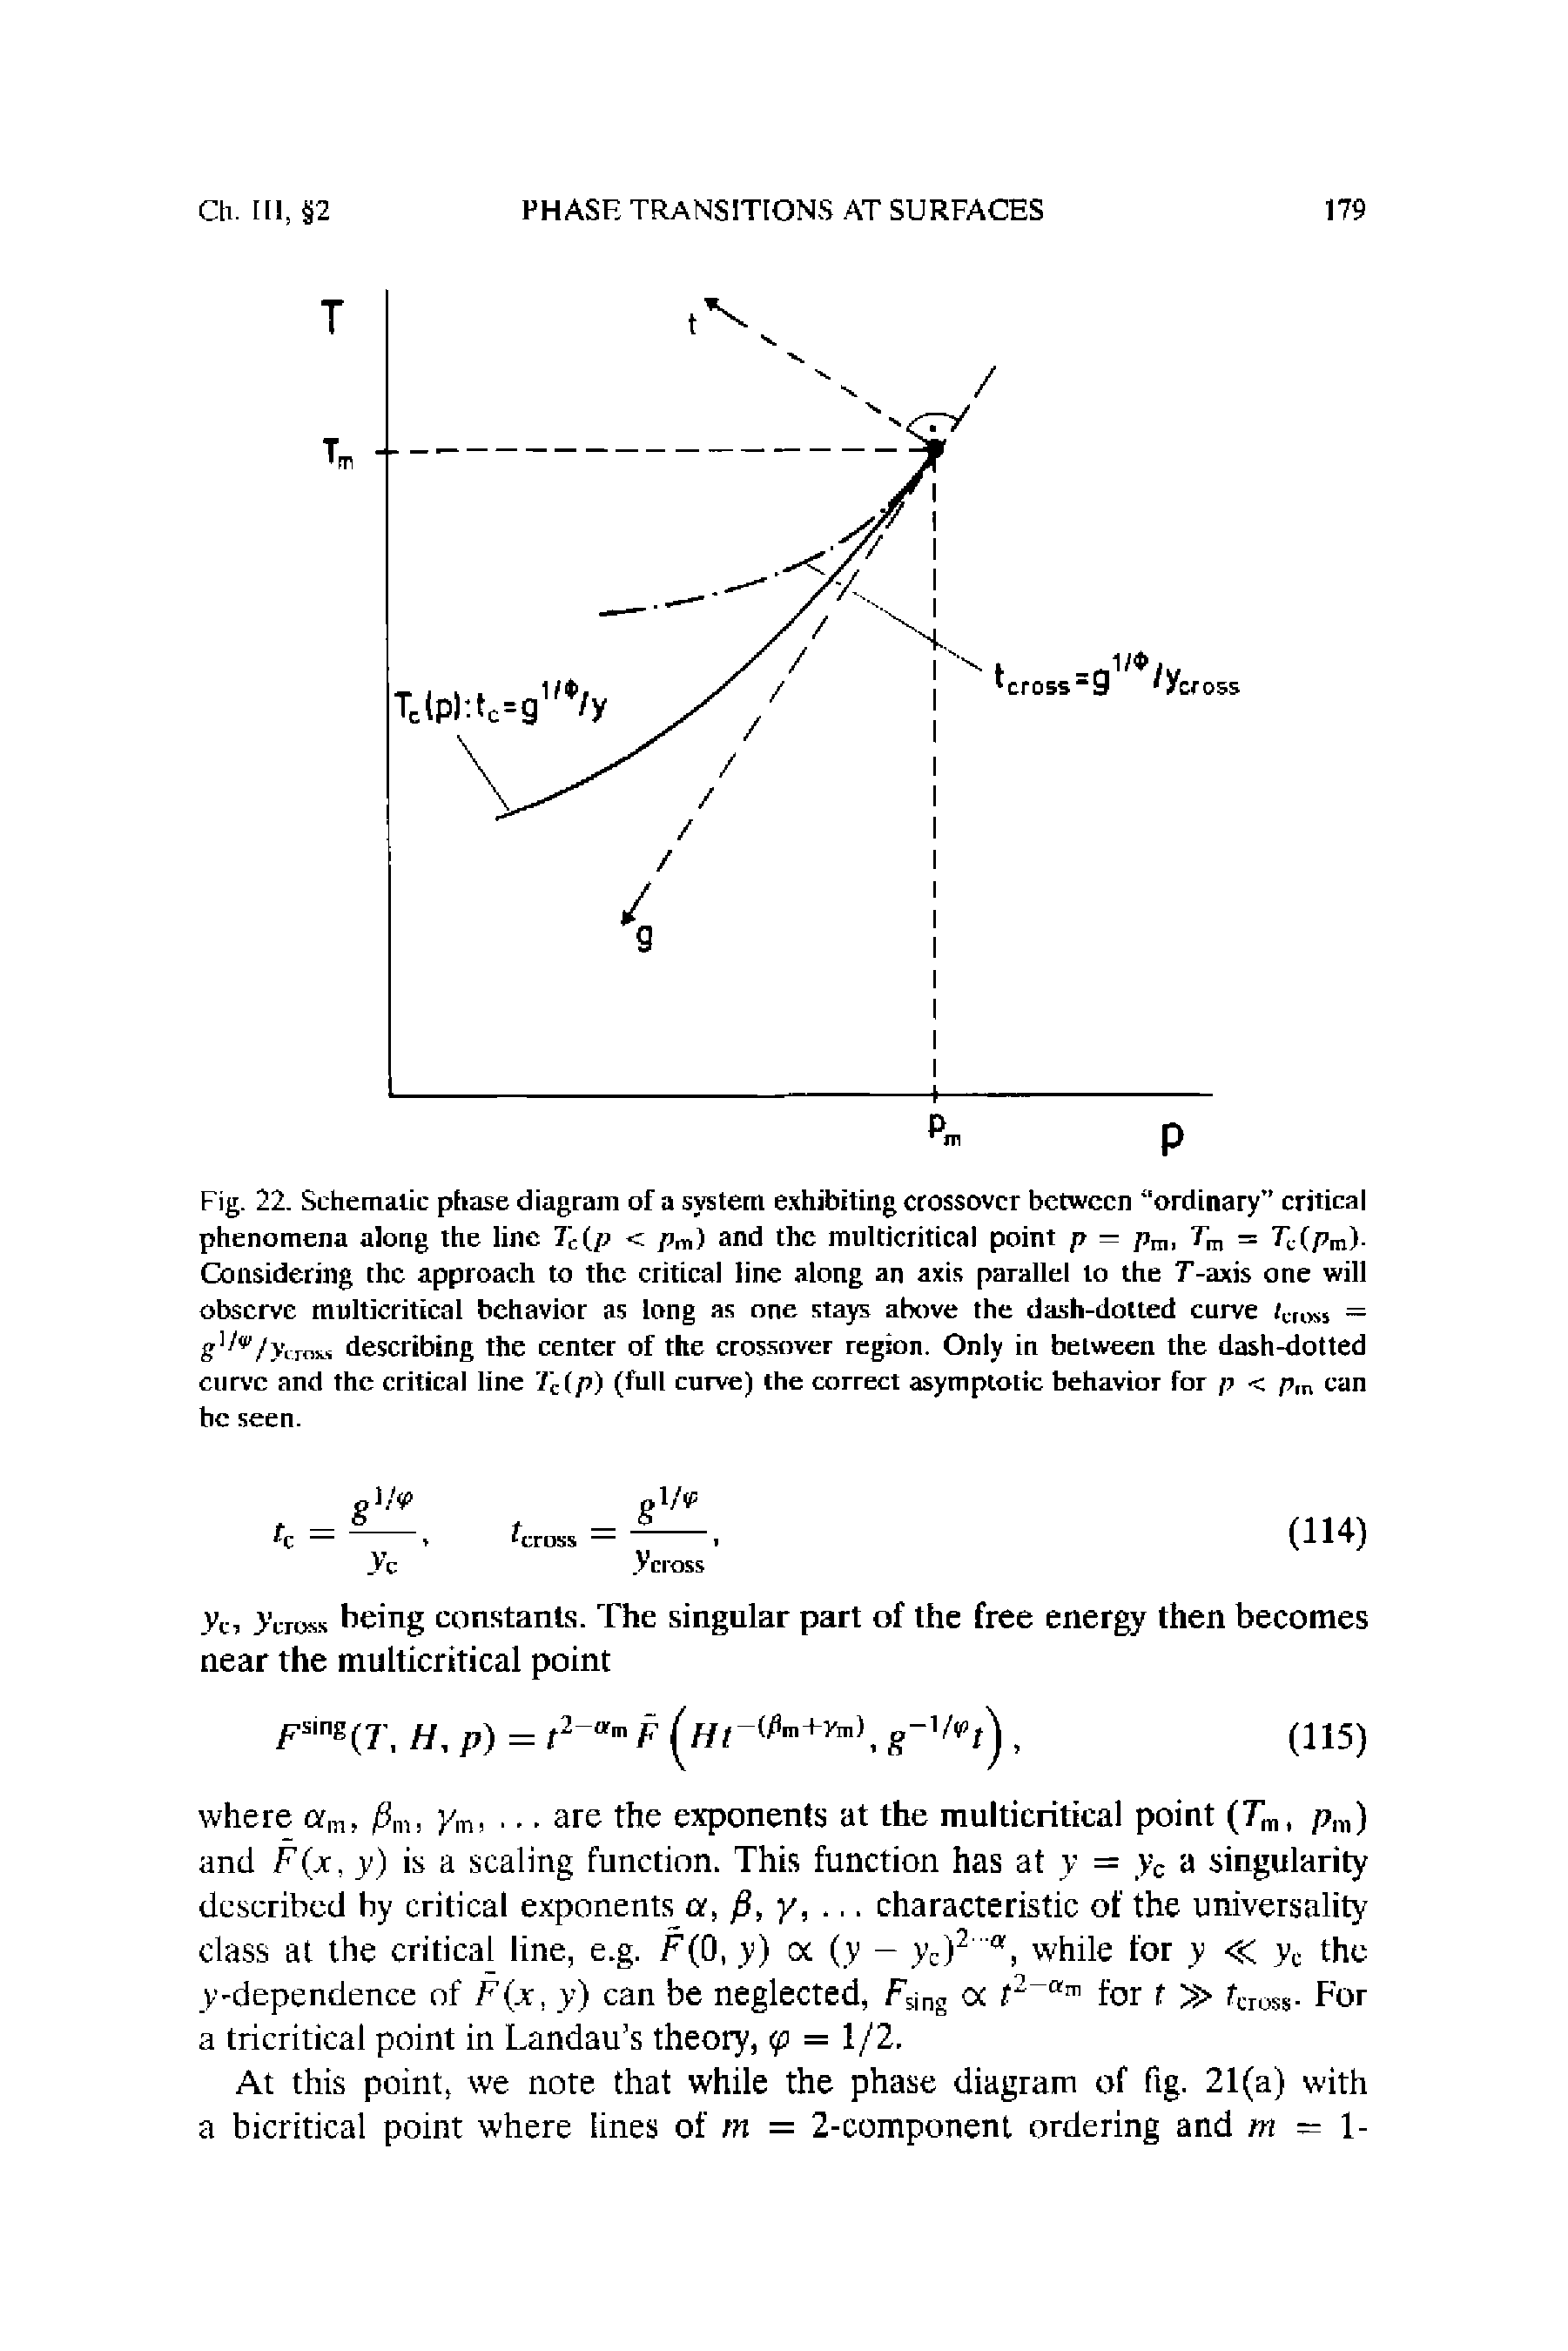 Fig. 22. Schematic phase diagram of a system exhibiting crossover between ordinary critical phenomena along the line Tc(p < pm) and the multicritical point p — pm, rm = TC(P m)-Considering the approach to the critical line along an axis parallel to the T-axis one will observe multicritical behavior as long as one stays above the dash-dotted curve /CIOS5 = describing the center of the crossover region. Only in between the dash-dotted curve and the critical line Tc(p) (full curve) the correct asymptotic behavior for p < pln can be seen.